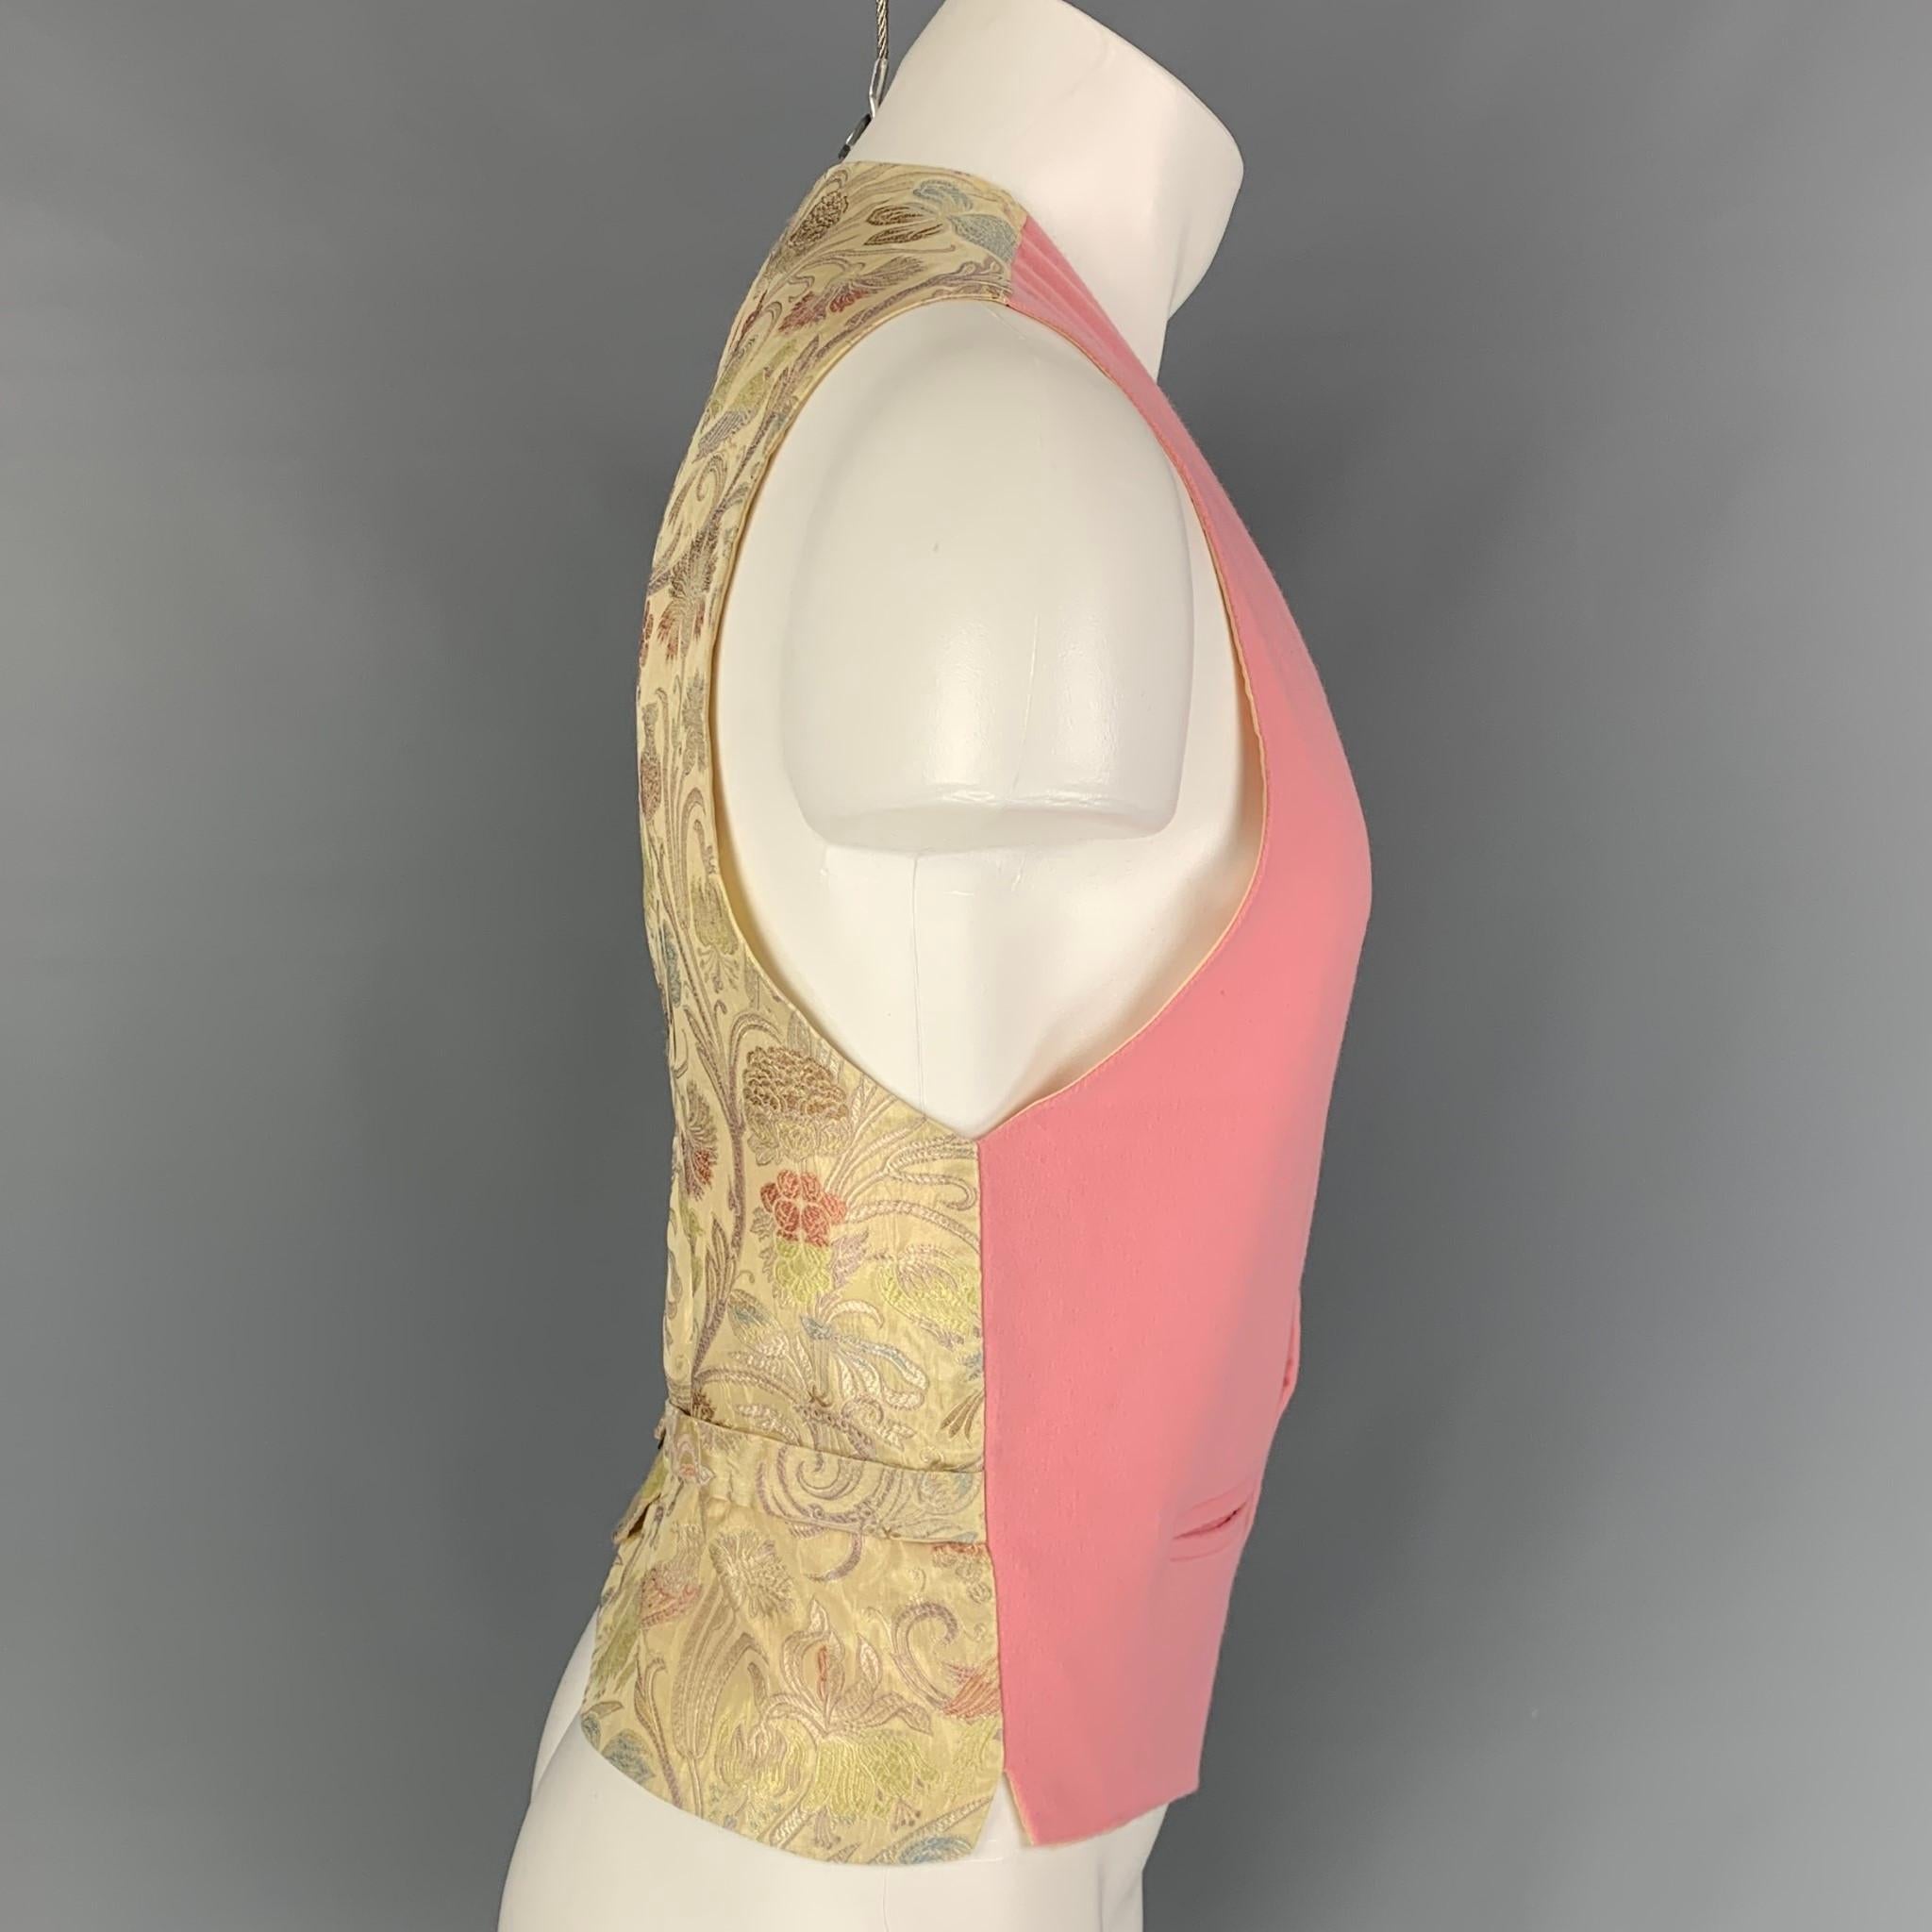 BRENDA KETT vest comes in a pink & beige cashmere with a silk jacquard back featuring a back belt, slit pockets, and a buttoned closure. Made in USA.

Very Good Pre-Owned Condition.
Marked: M

Measurements:

Shoulder: 13.5 in.
Chest: 41 in.
Length: